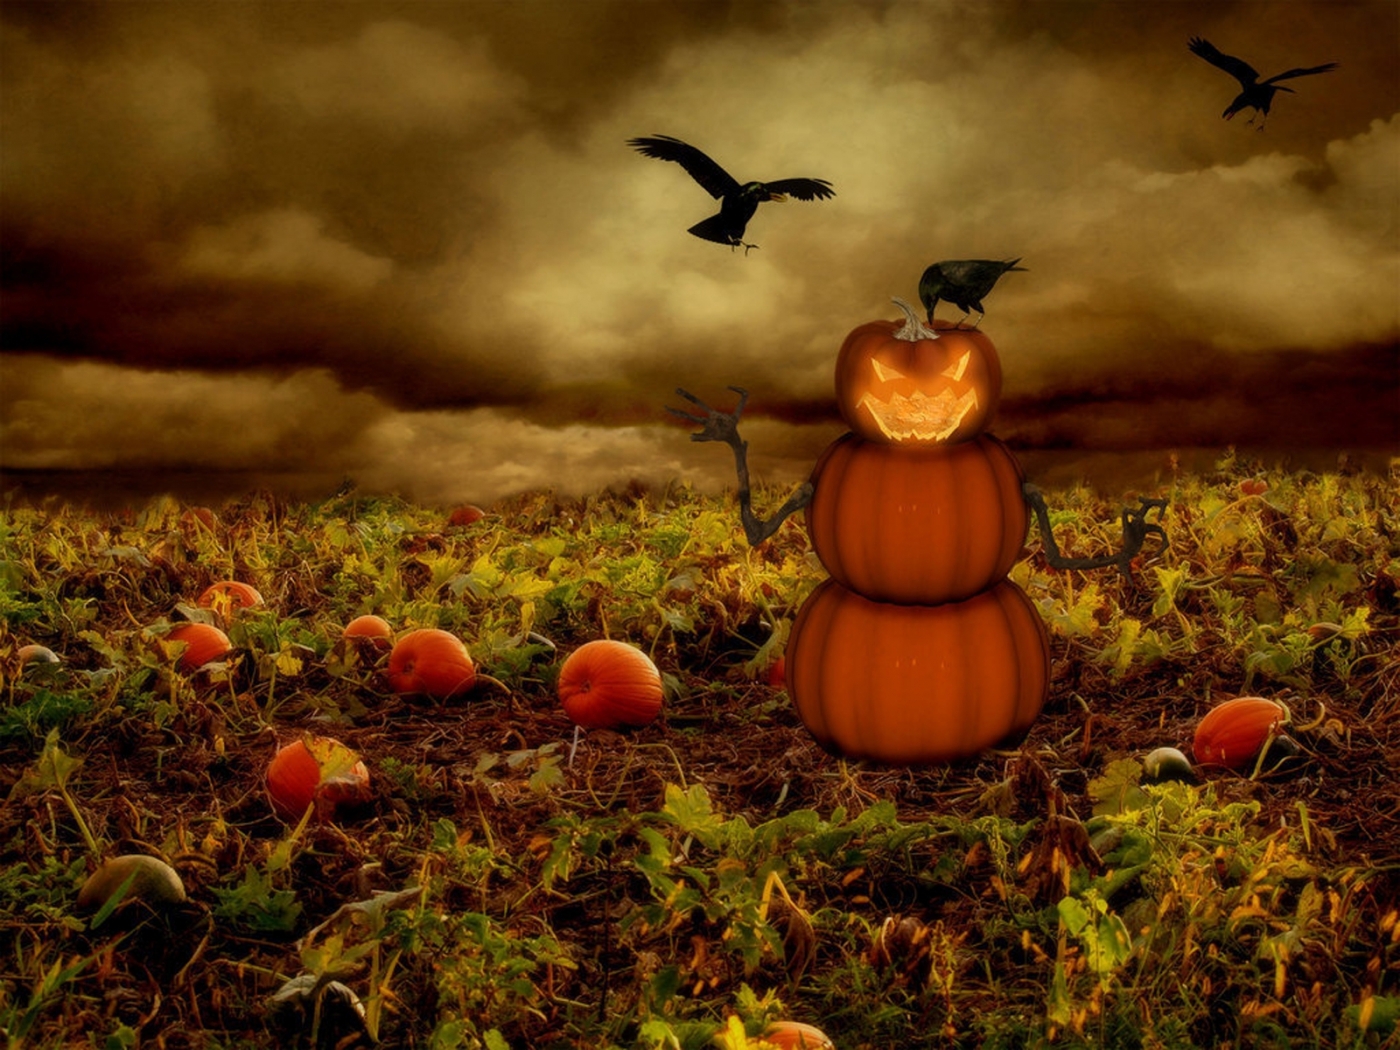 Mobile wallpaper: Halloween, Holidays, Background, 35774 download the picture for free